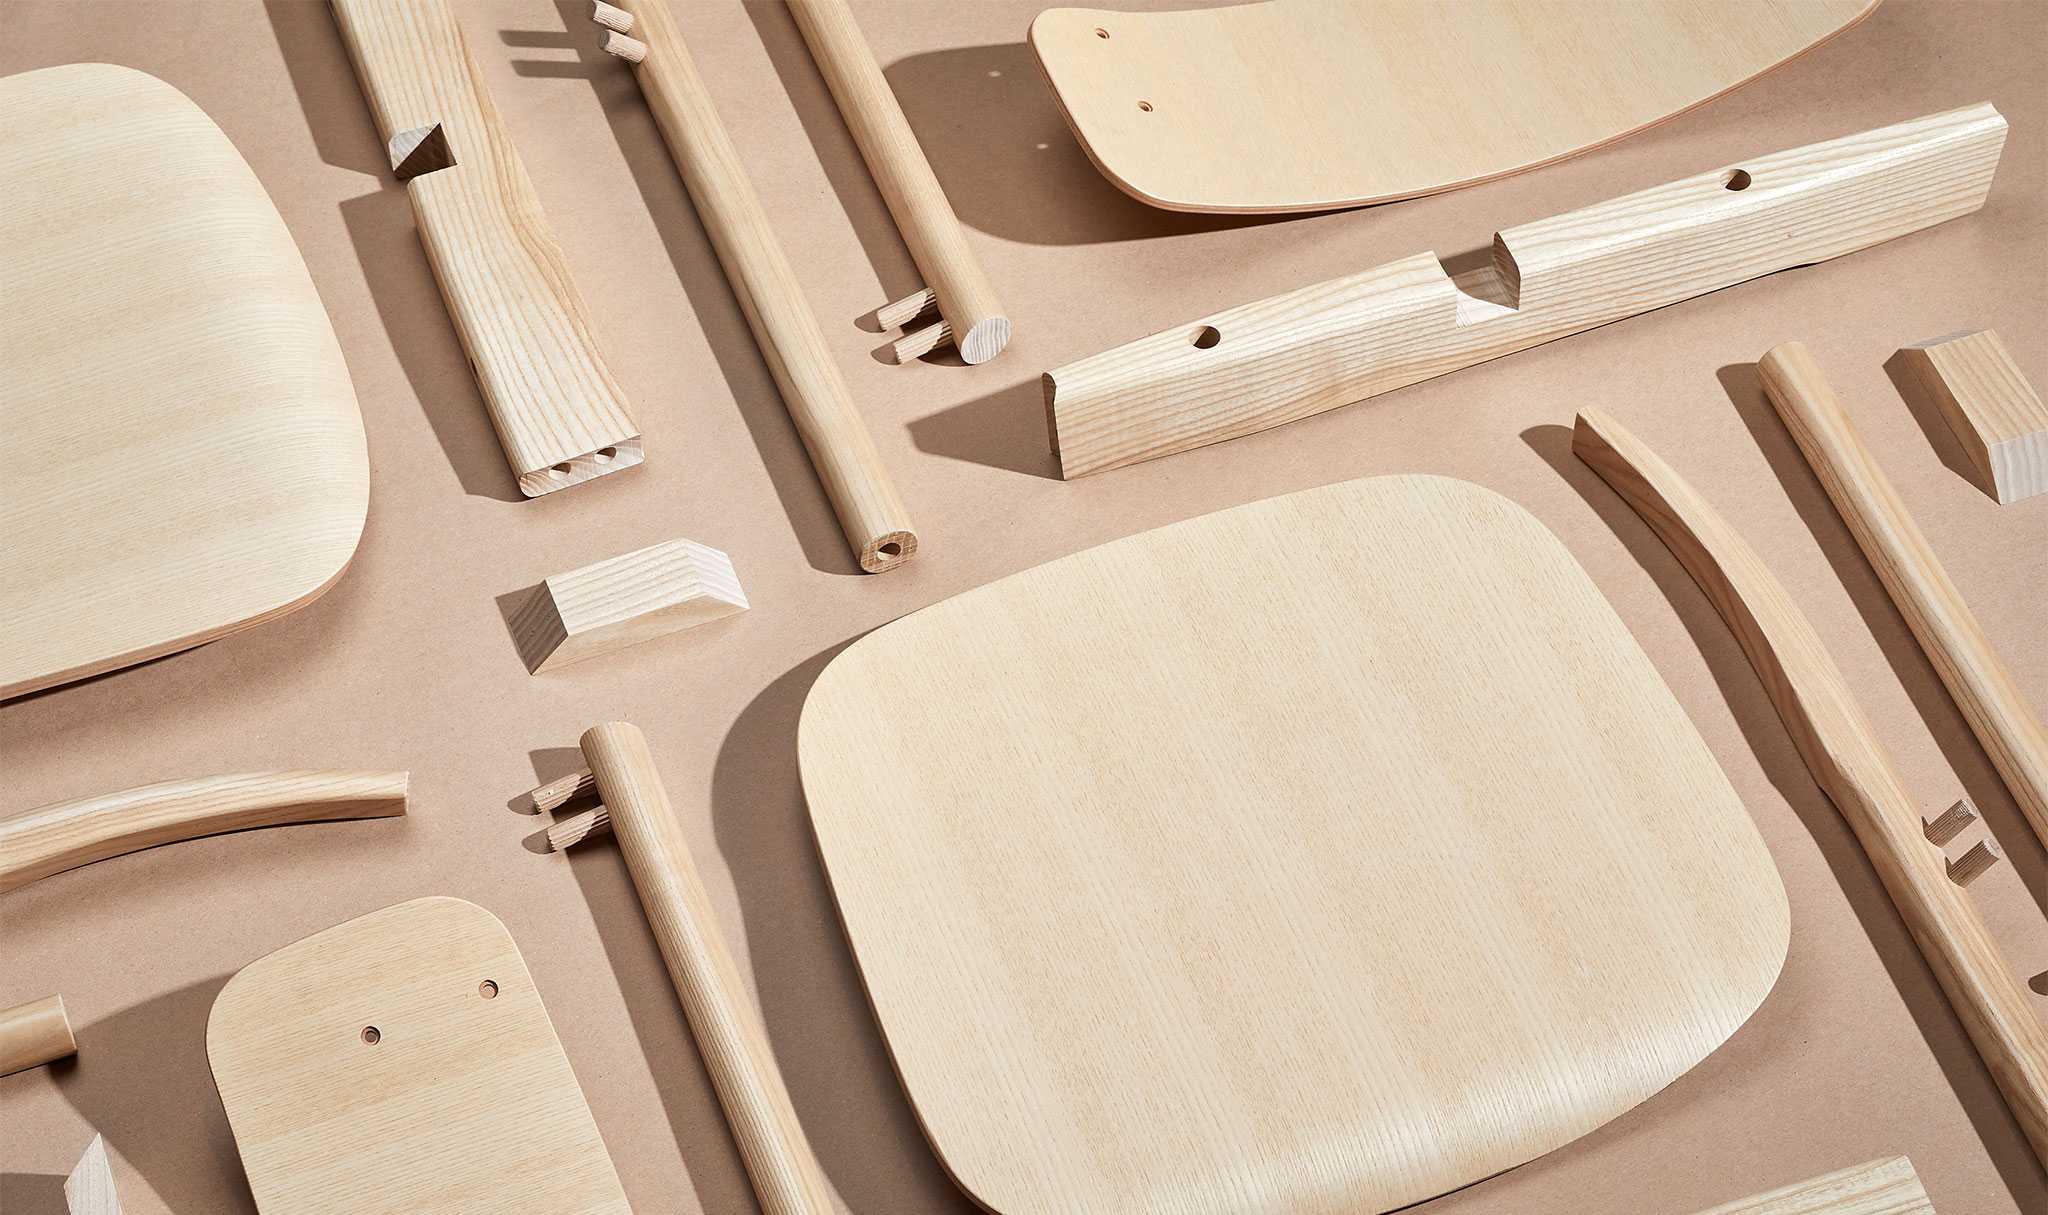 Wooden parts of the Ella chair